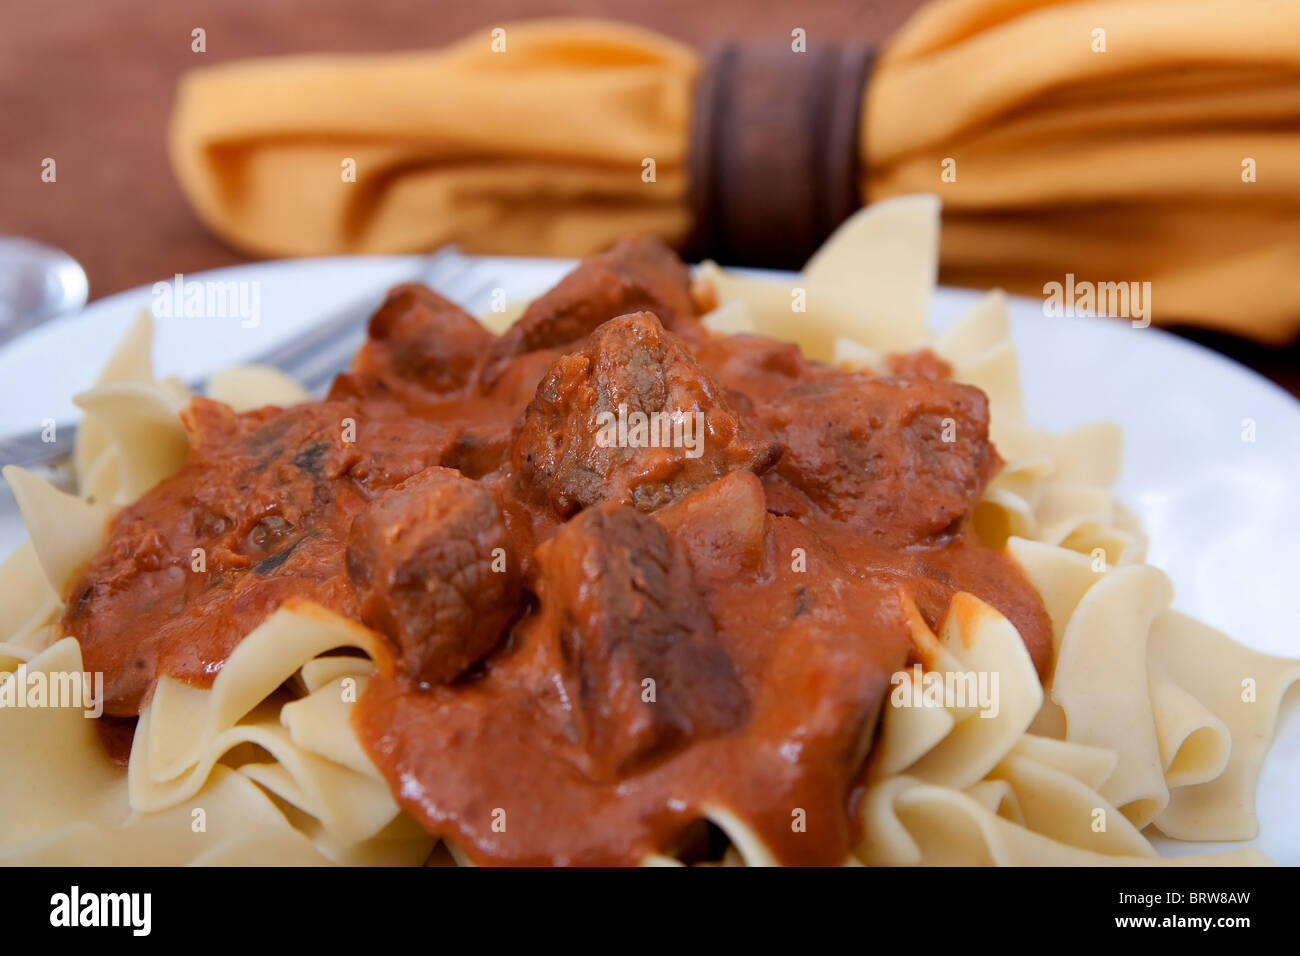 closeup plate of beef stroganoff over egg noodles with sauce Stock Photo